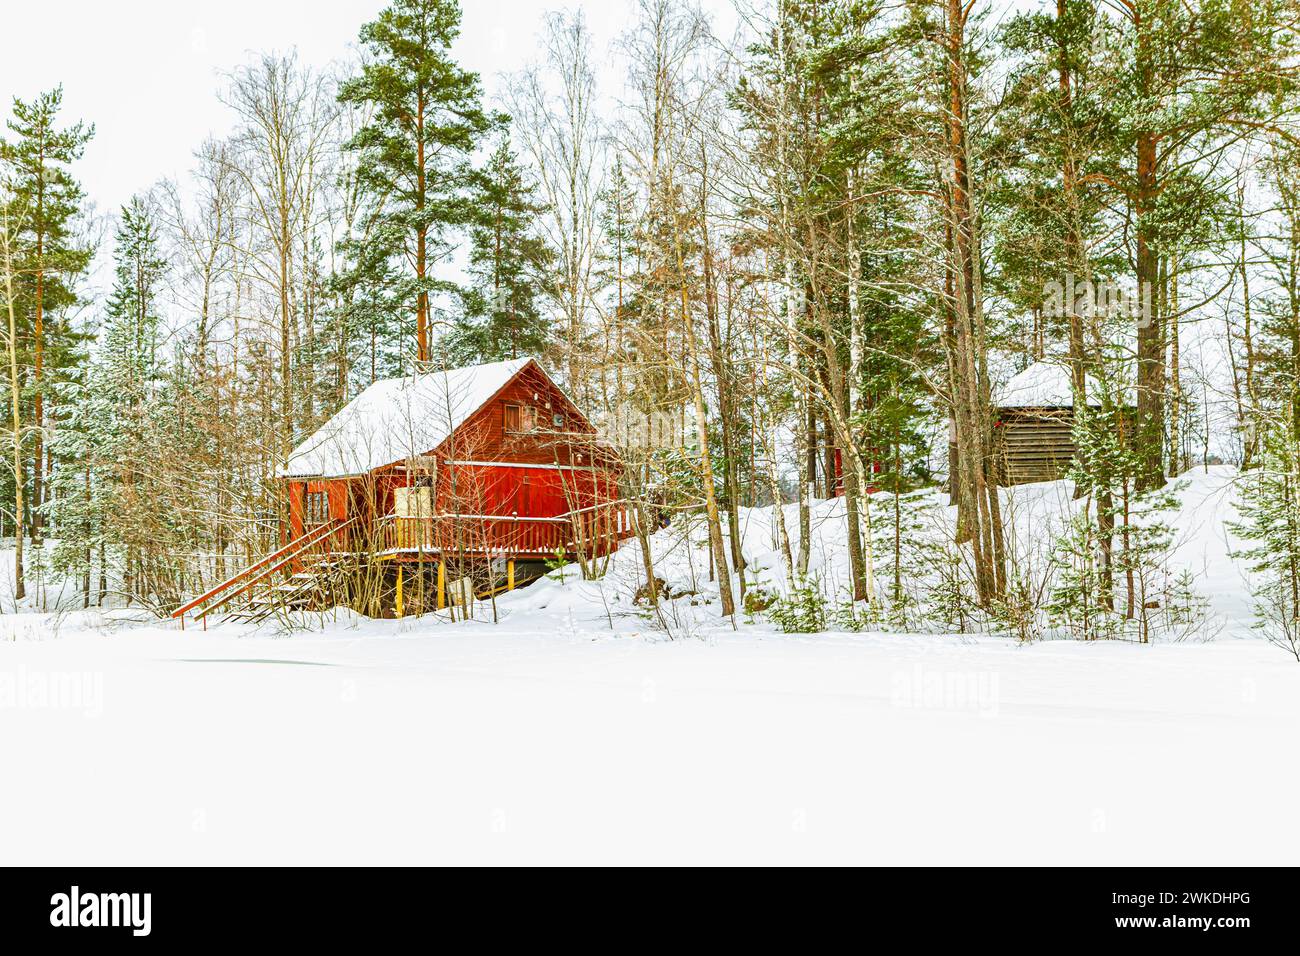 Wooden house on the shore of a forest lake. Snowy winter landscape. Stock Photo